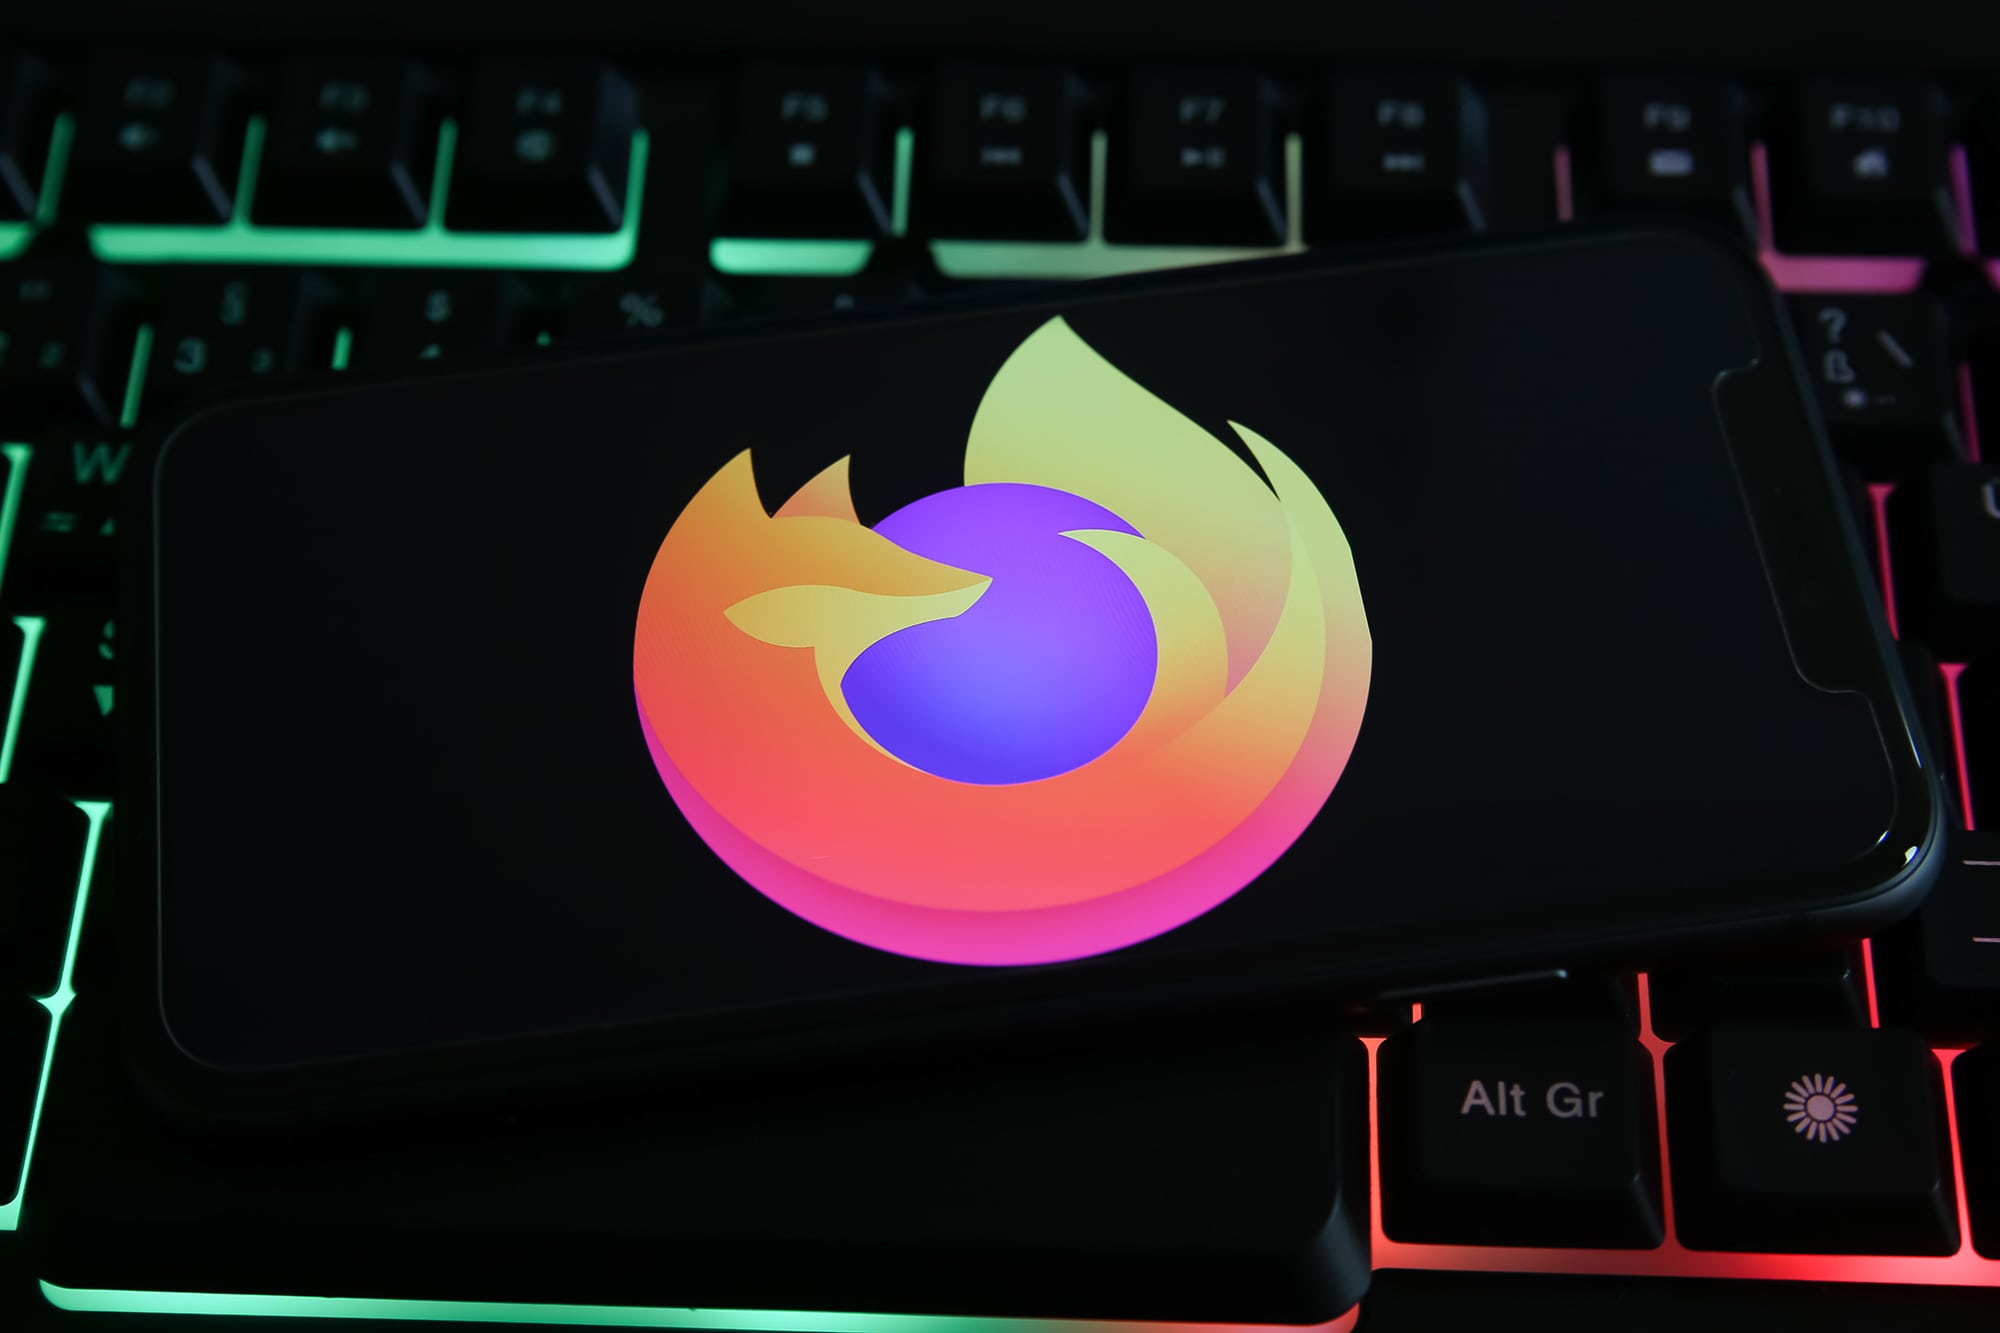 If you value privacy, ditch Chrome and switch to Firefox now